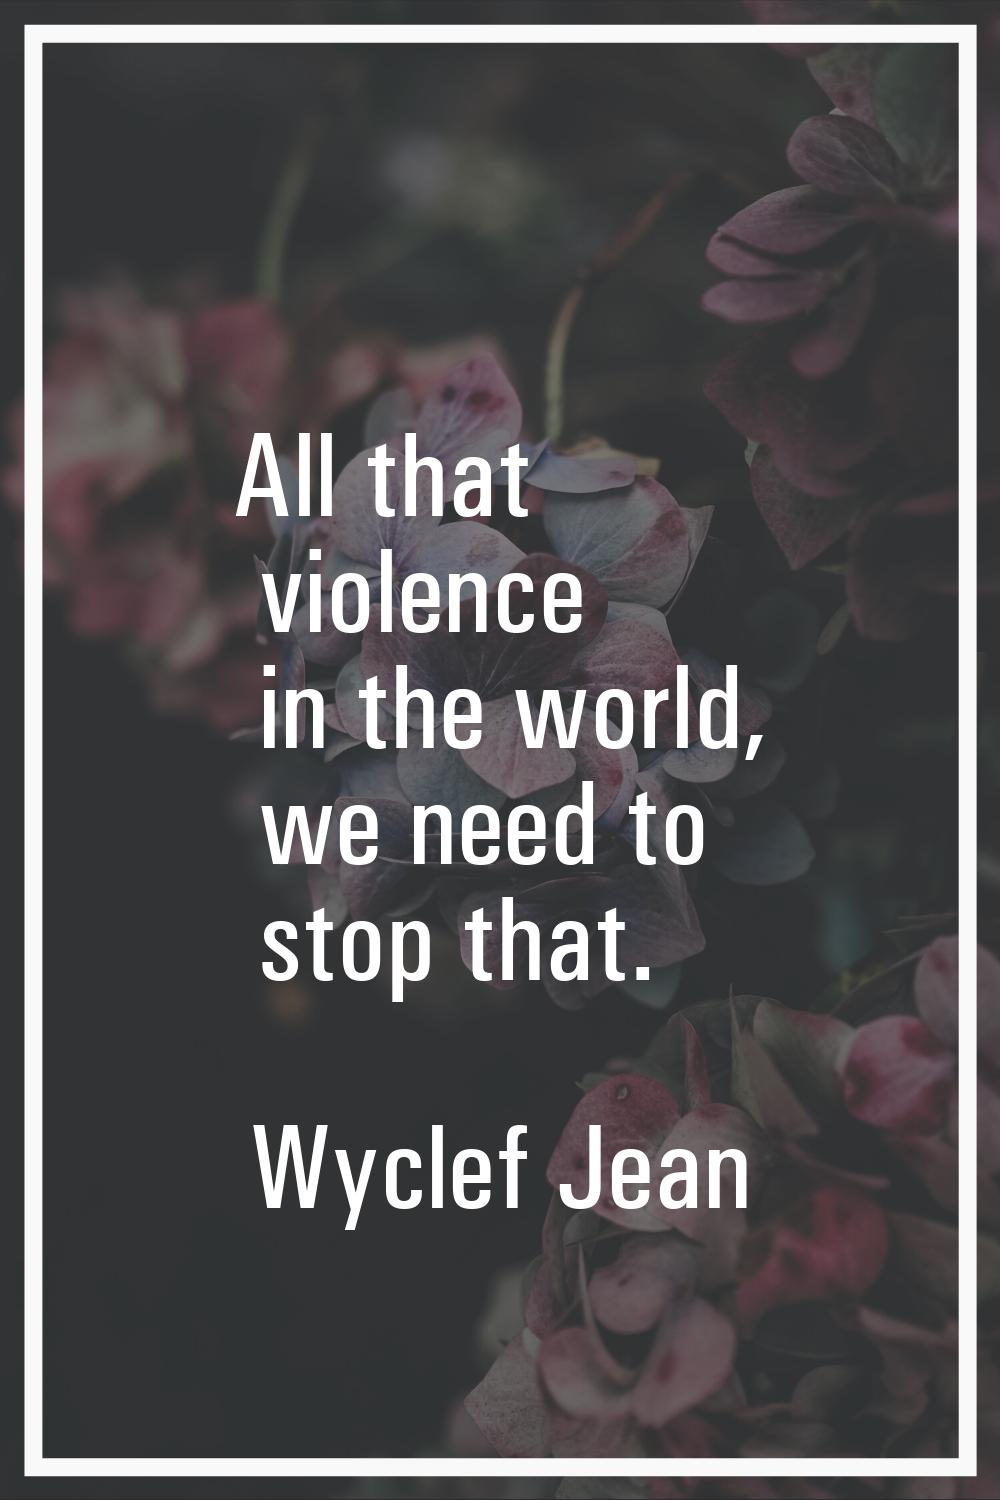 All that violence in the world, we need to stop that.